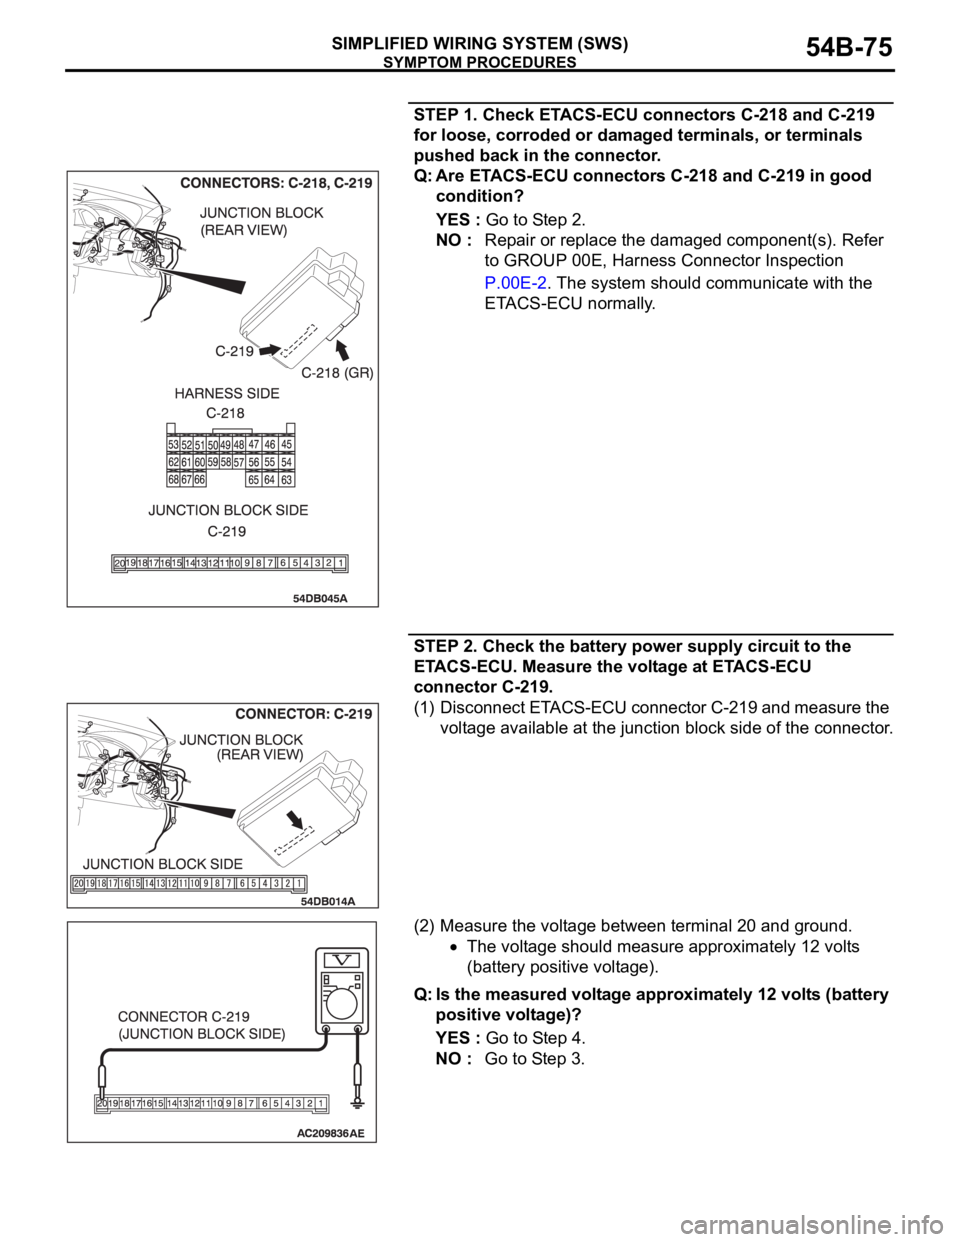 MITSUBISHI 380 2005  Workshop Manual SYMPTOM PROCEDURES
SIMPLIFIED WIRING SYSTEM (SWS)54B-75
STEP 1. Check ETACS-ECU connectors C-218 and C-219 
for loose, corroded or damaged terminals, or terminals 
pushed back in the connector.
Q: Are